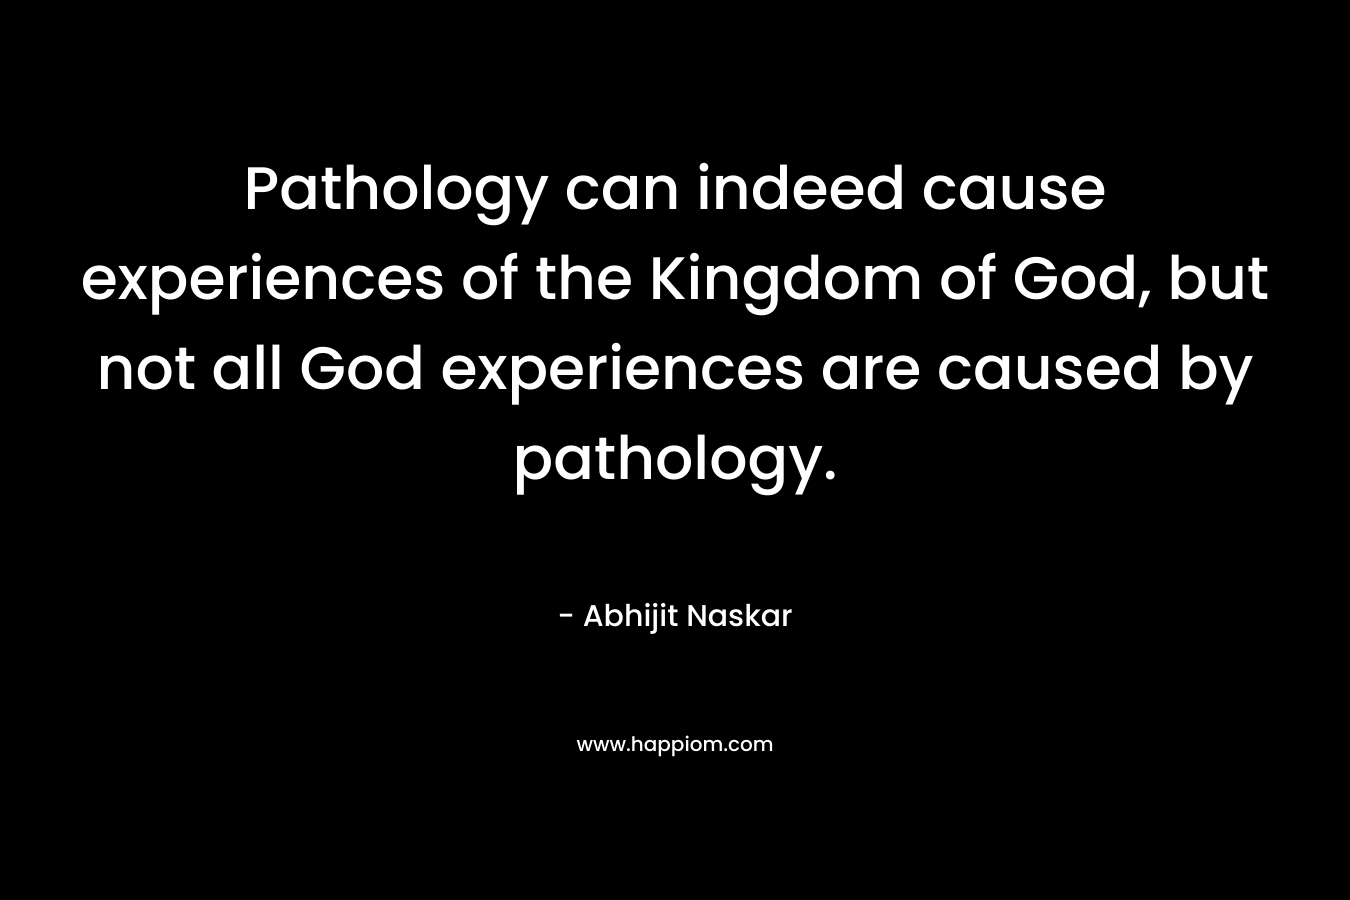 Pathology can indeed cause experiences of the Kingdom of God, but not all God experiences are caused by pathology. – Abhijit Naskar